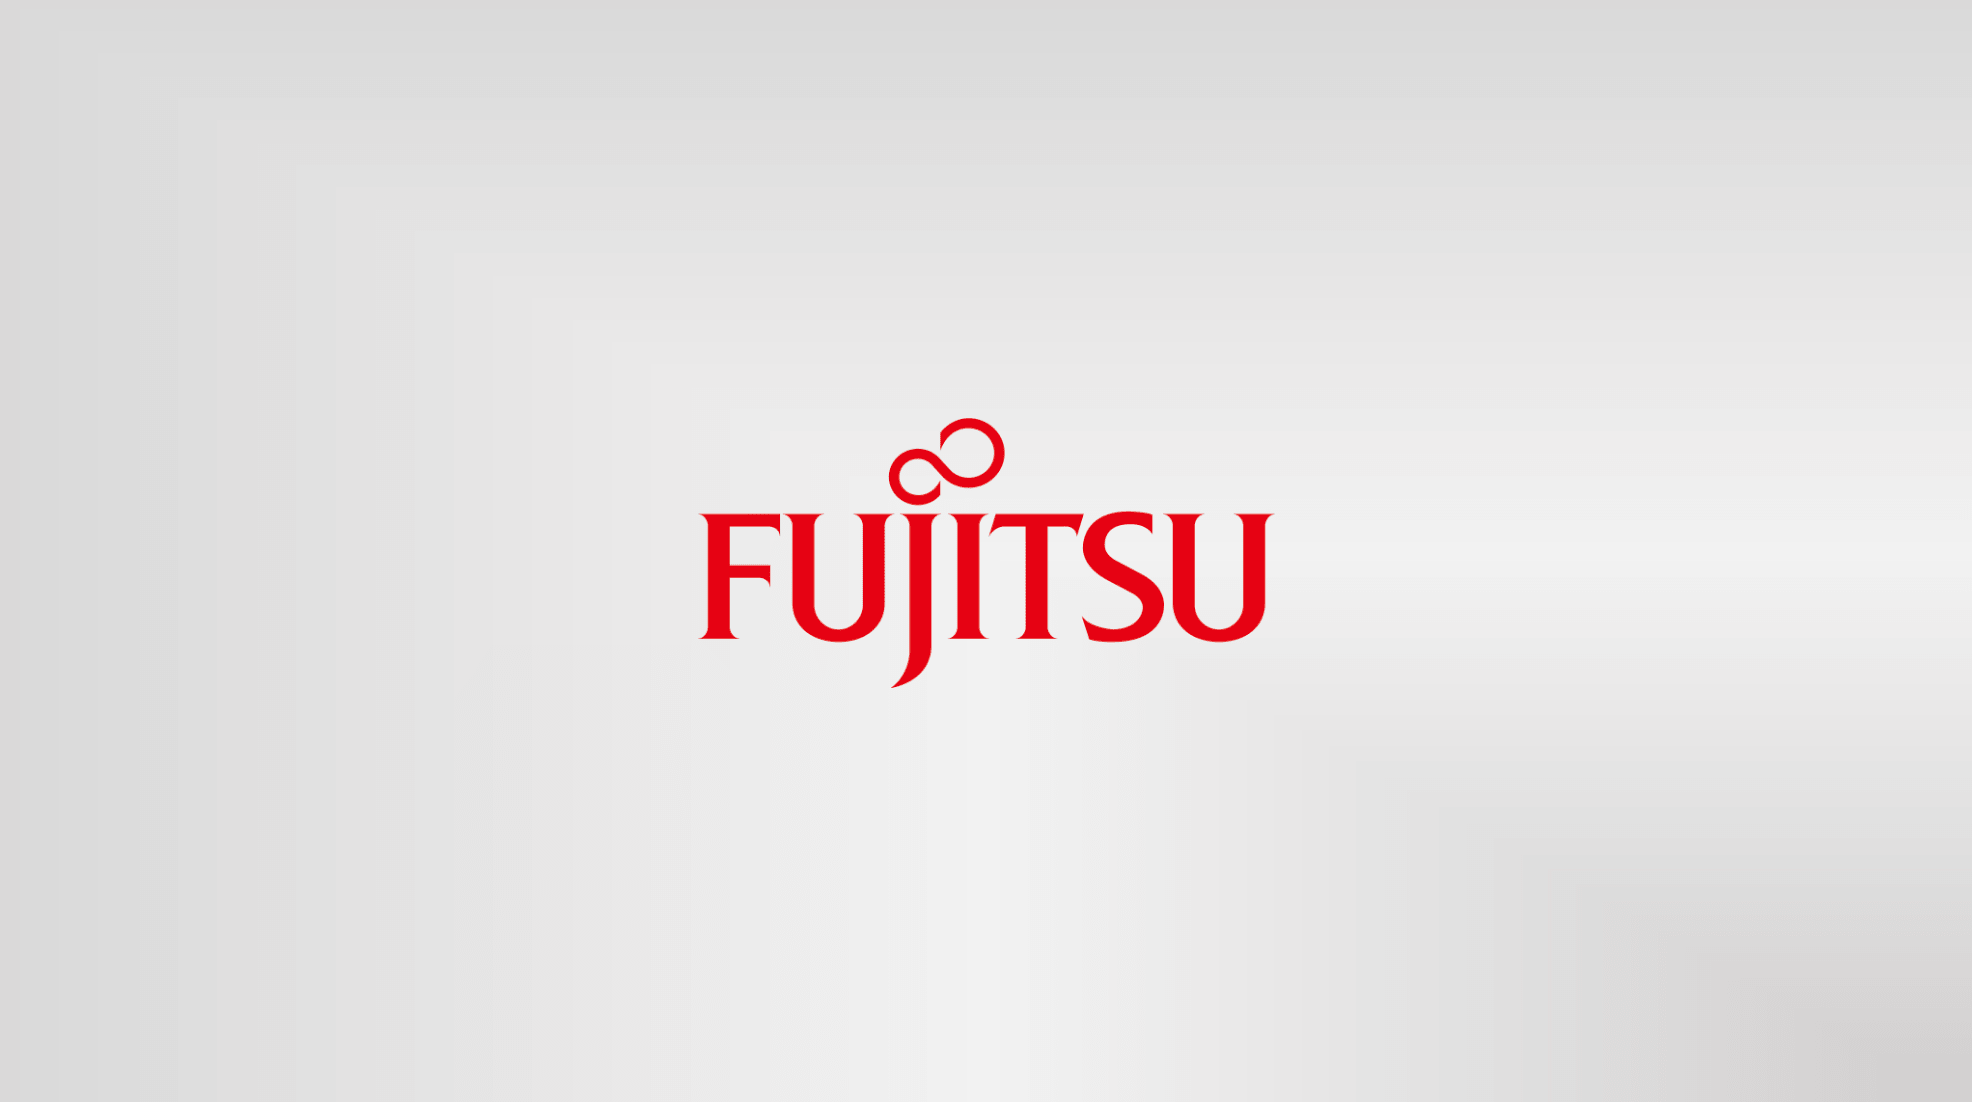 japanese-government-agencies-suffer-data-breaches-after-fujitsu-hack